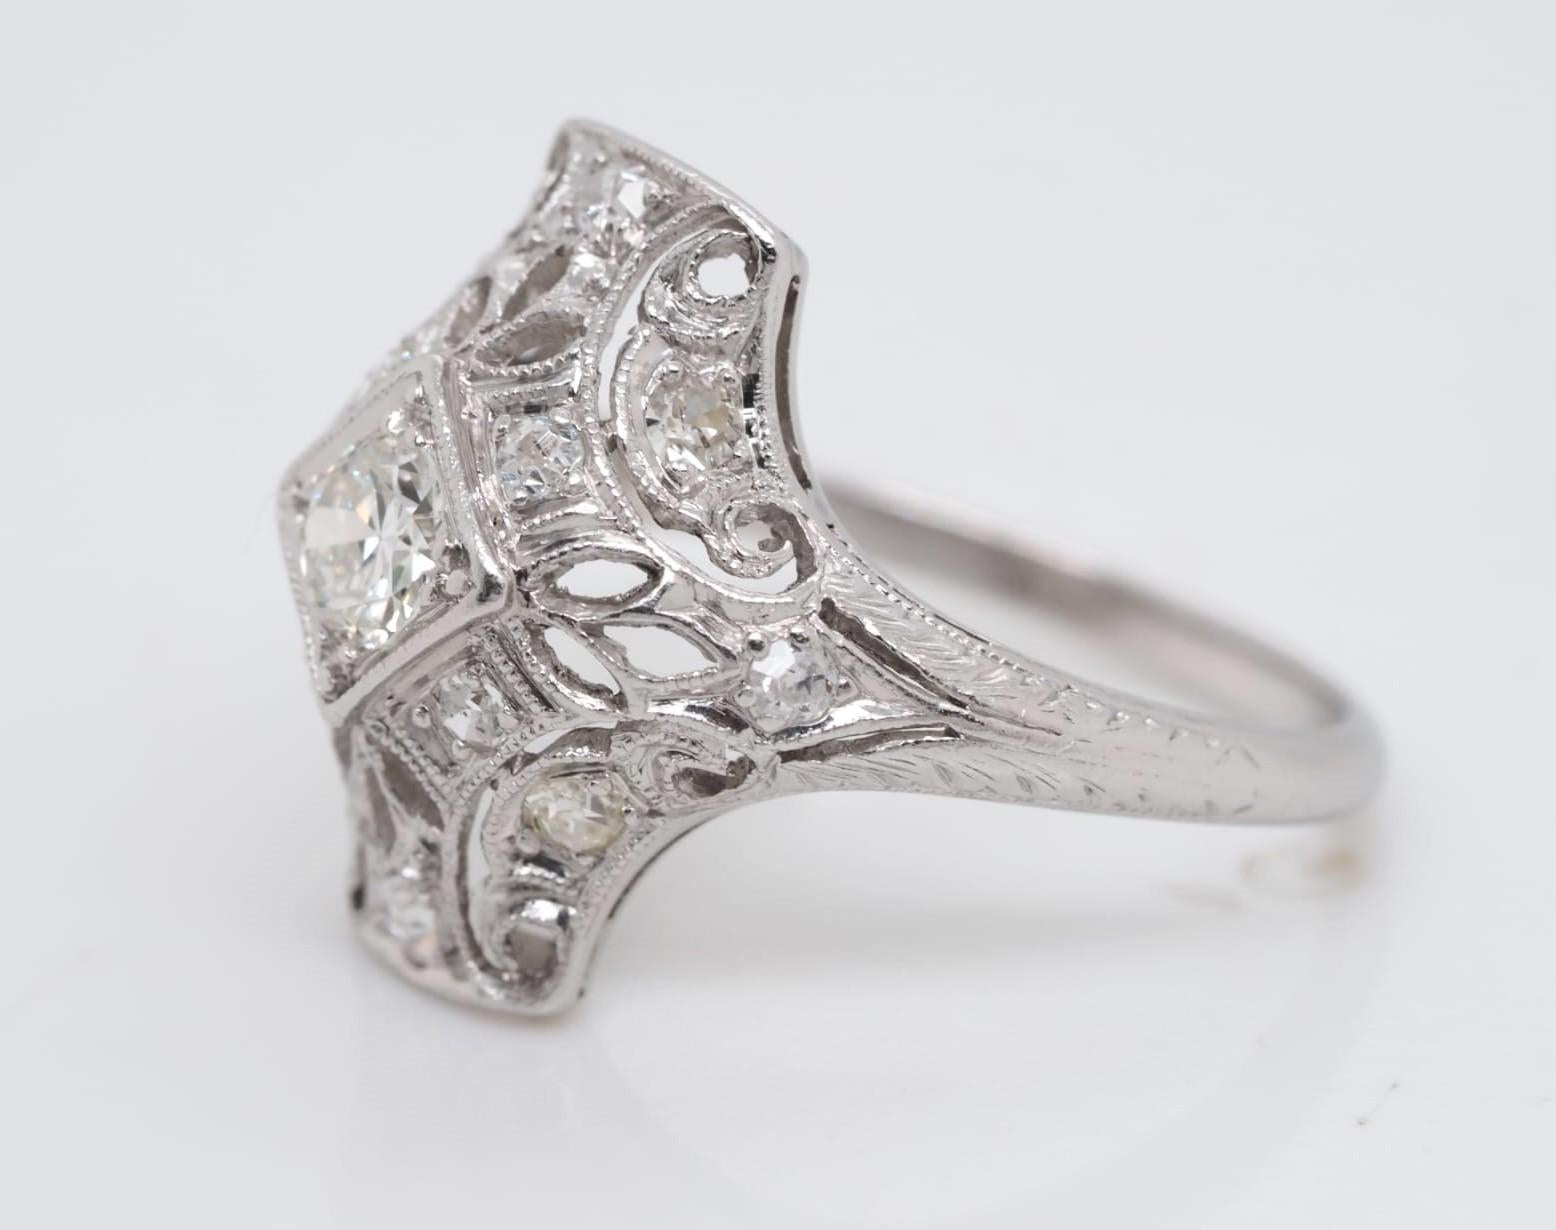 Antique Vintage Platinum 0.5 ct Old European Cut Diamond Engagement Ring In Good Condition For Sale In Addison, TX